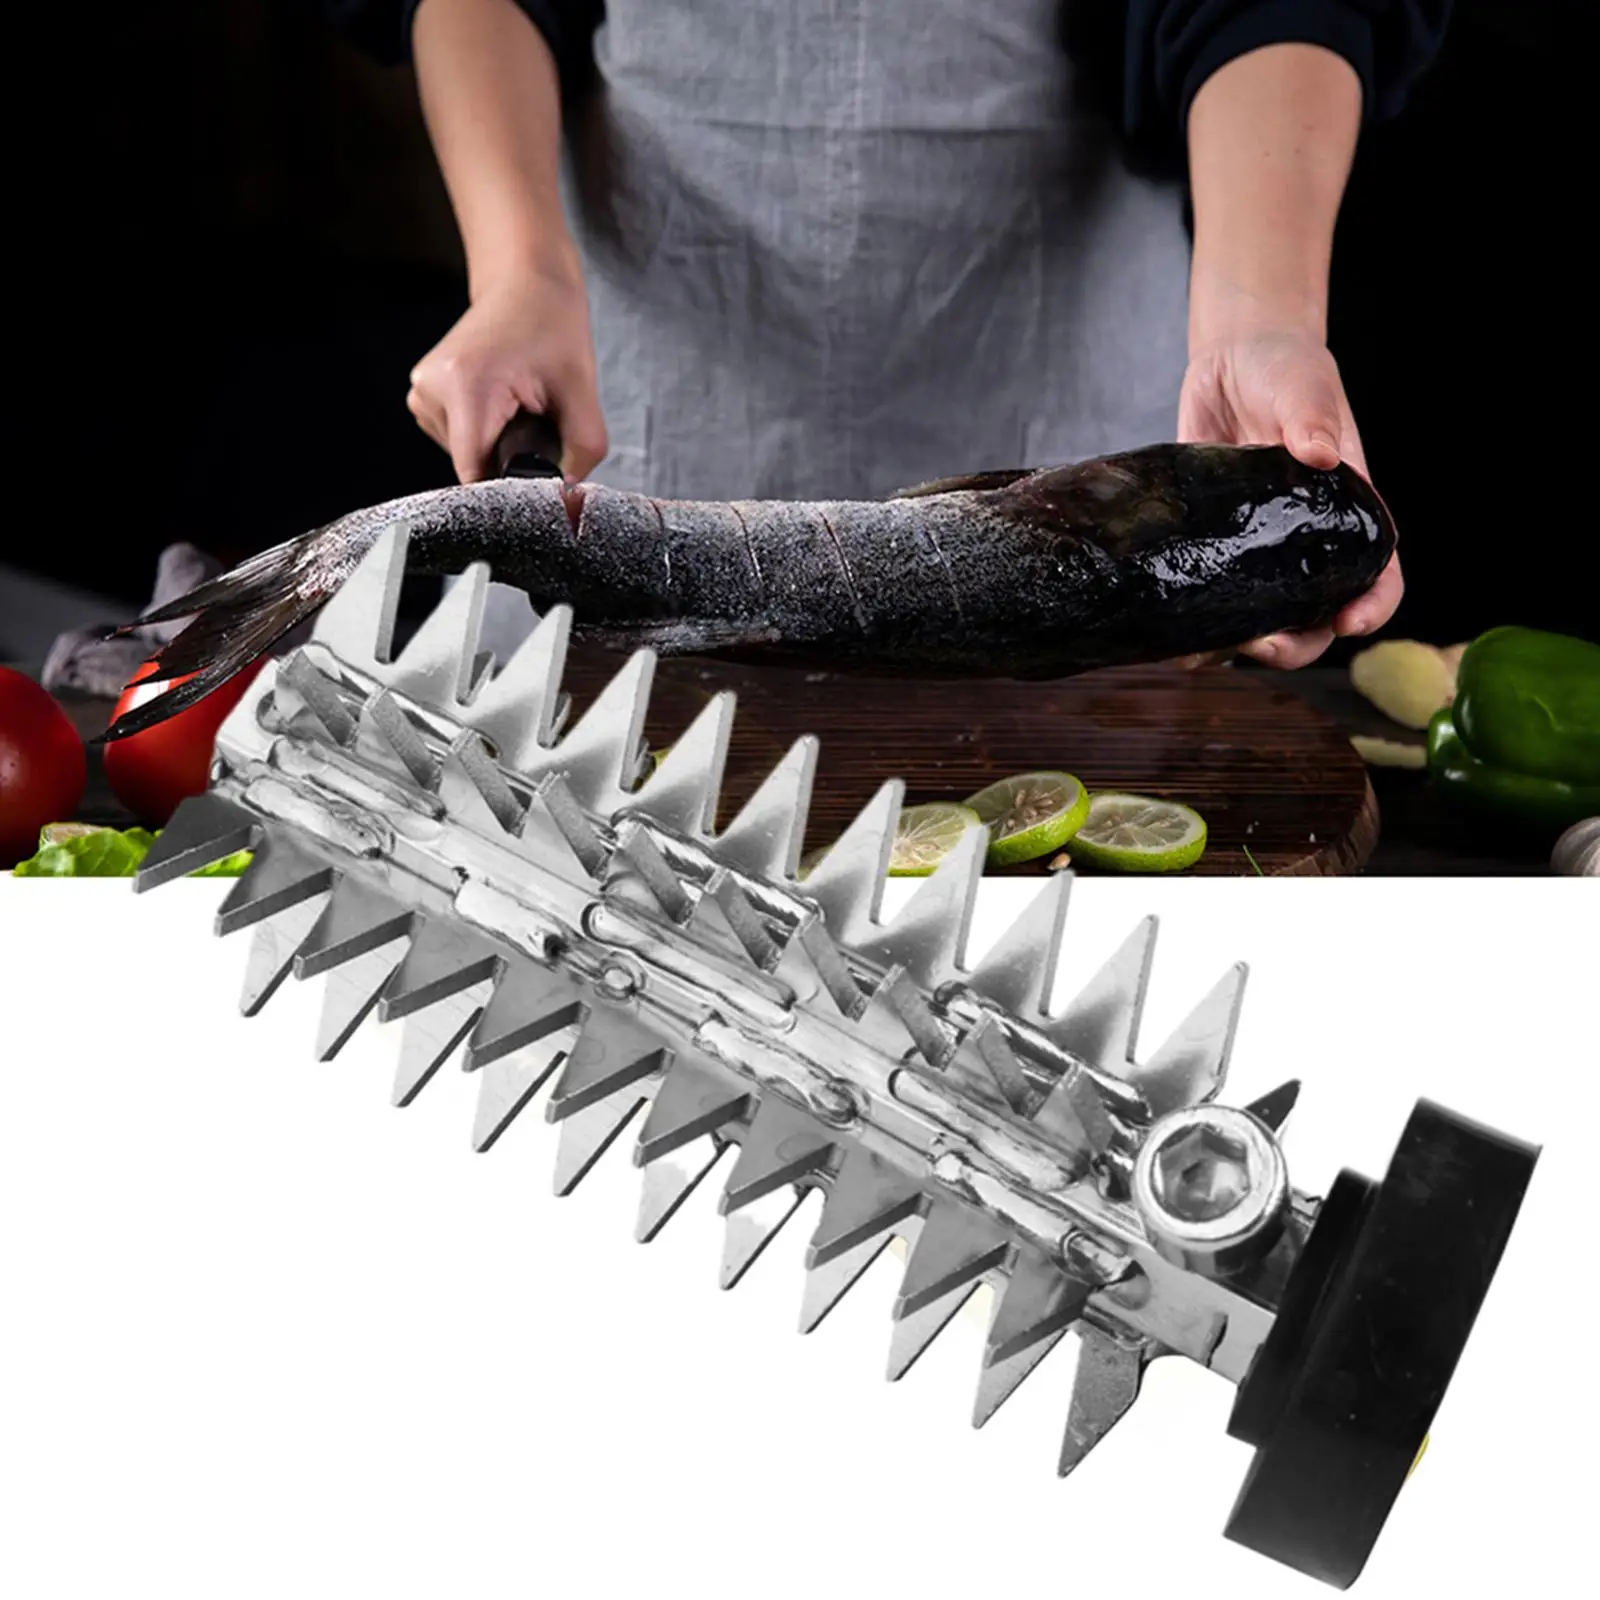 Stainless Steel Electric Fish Scaler Cutter Head Fish Scaler Scraper Descaler Kitchen Gadgets for Restaurant Camping Home